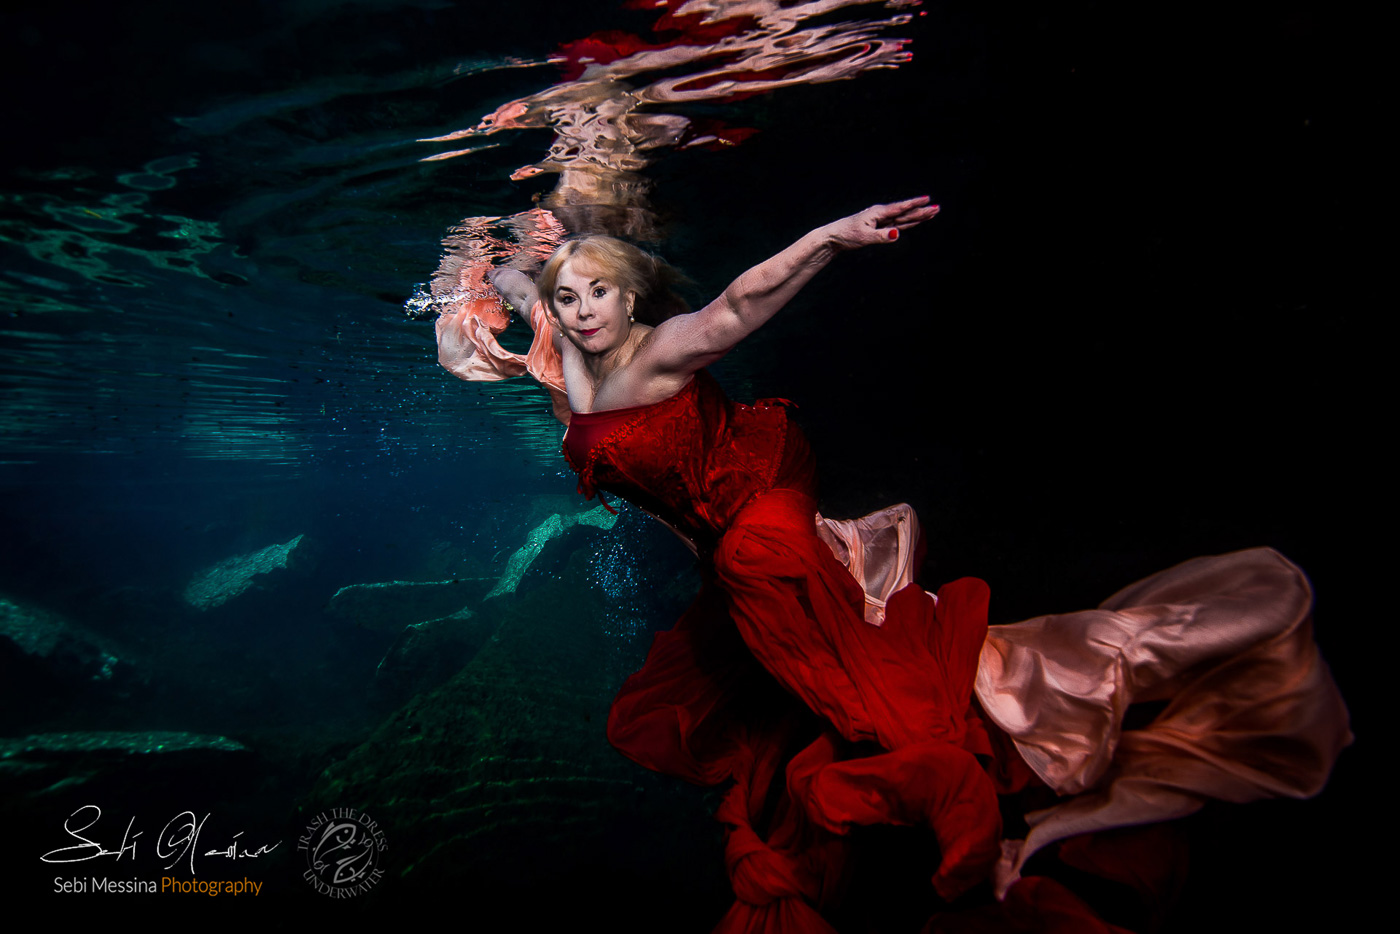 Cenote Tulum Underwater Modeling – Forever Young - Janet – Sebi Messina Photography